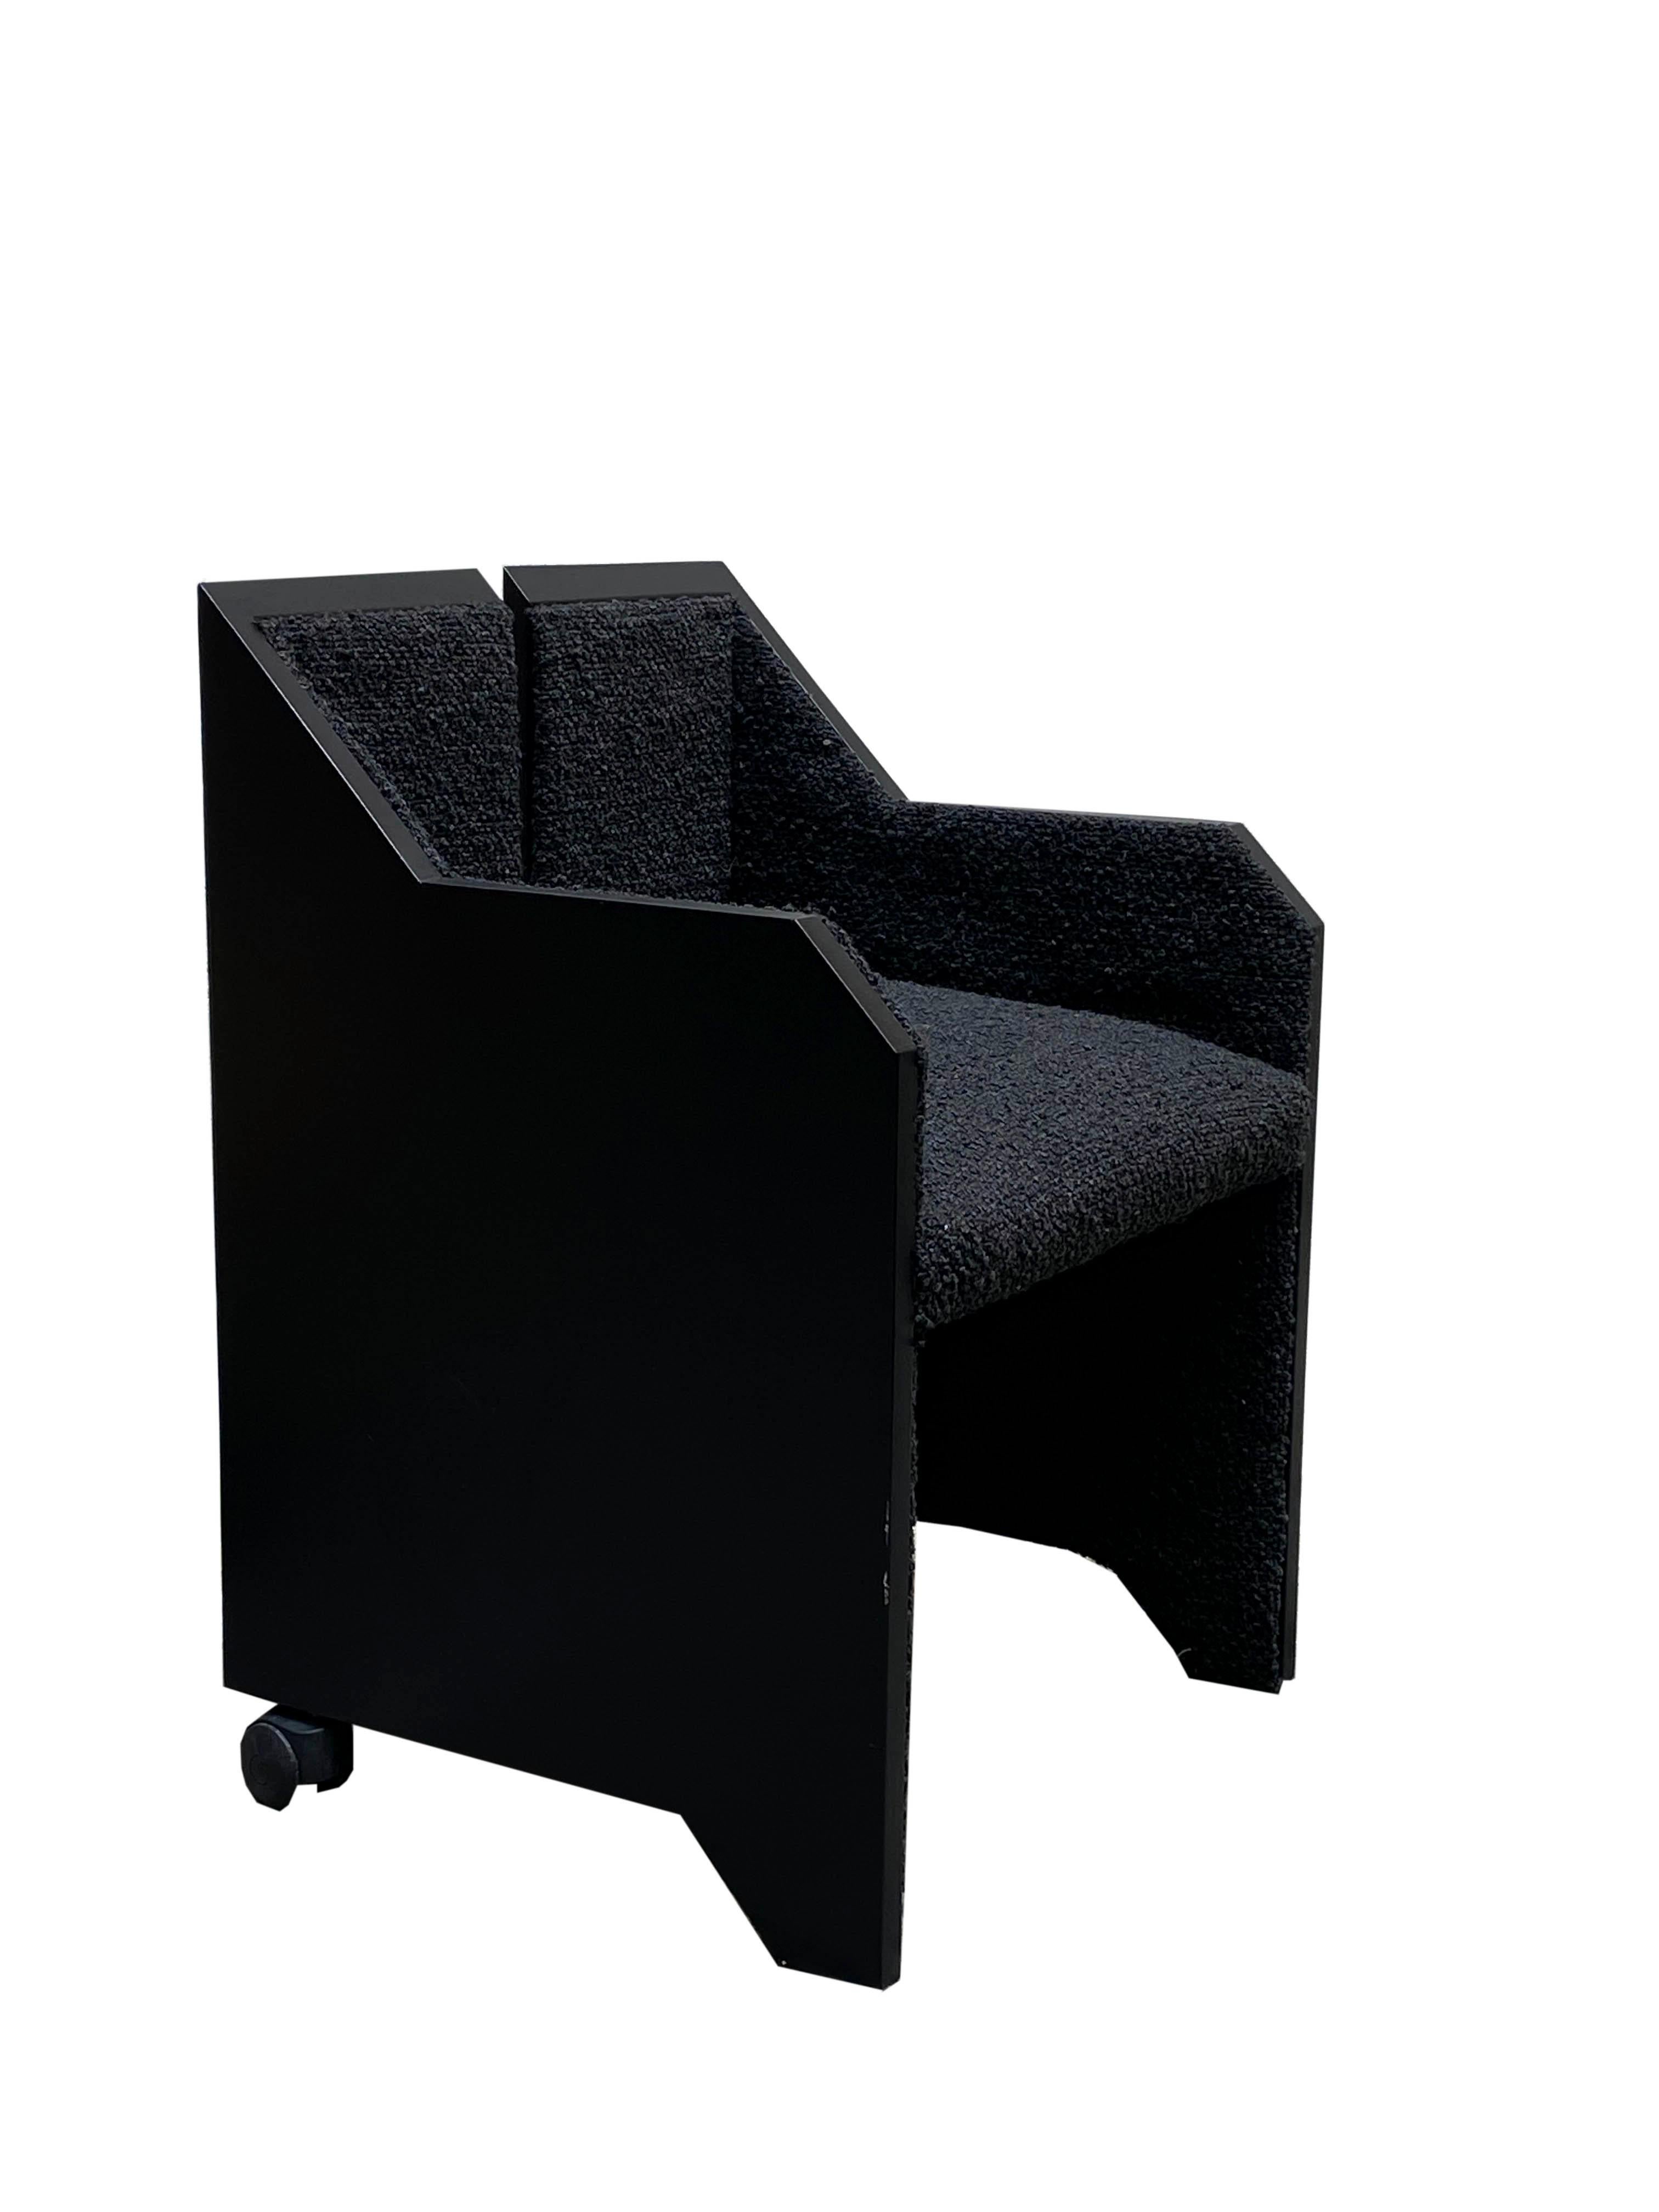 Nicola Pagliara Armchair, Italy 1970s In Good Condition For Sale In Naples, IT